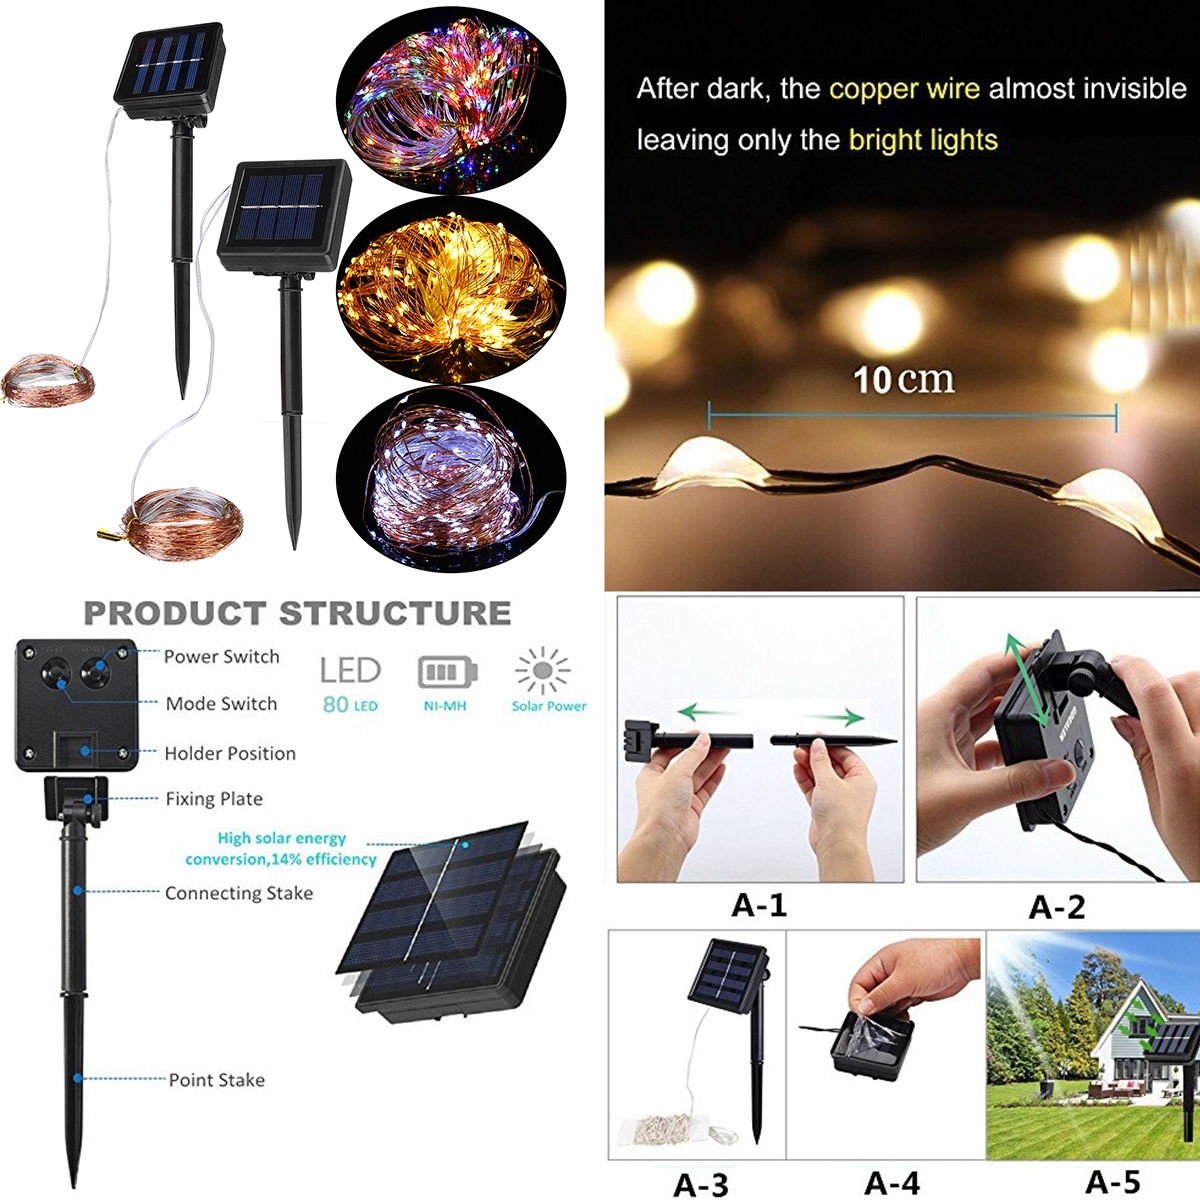 12M-22M-LED-Solar-Power-String-Light-8-Modes-Copper-Wire-Fairy-Outdoor-Garden-Waterproof-Holiday-Dec-1713762-6